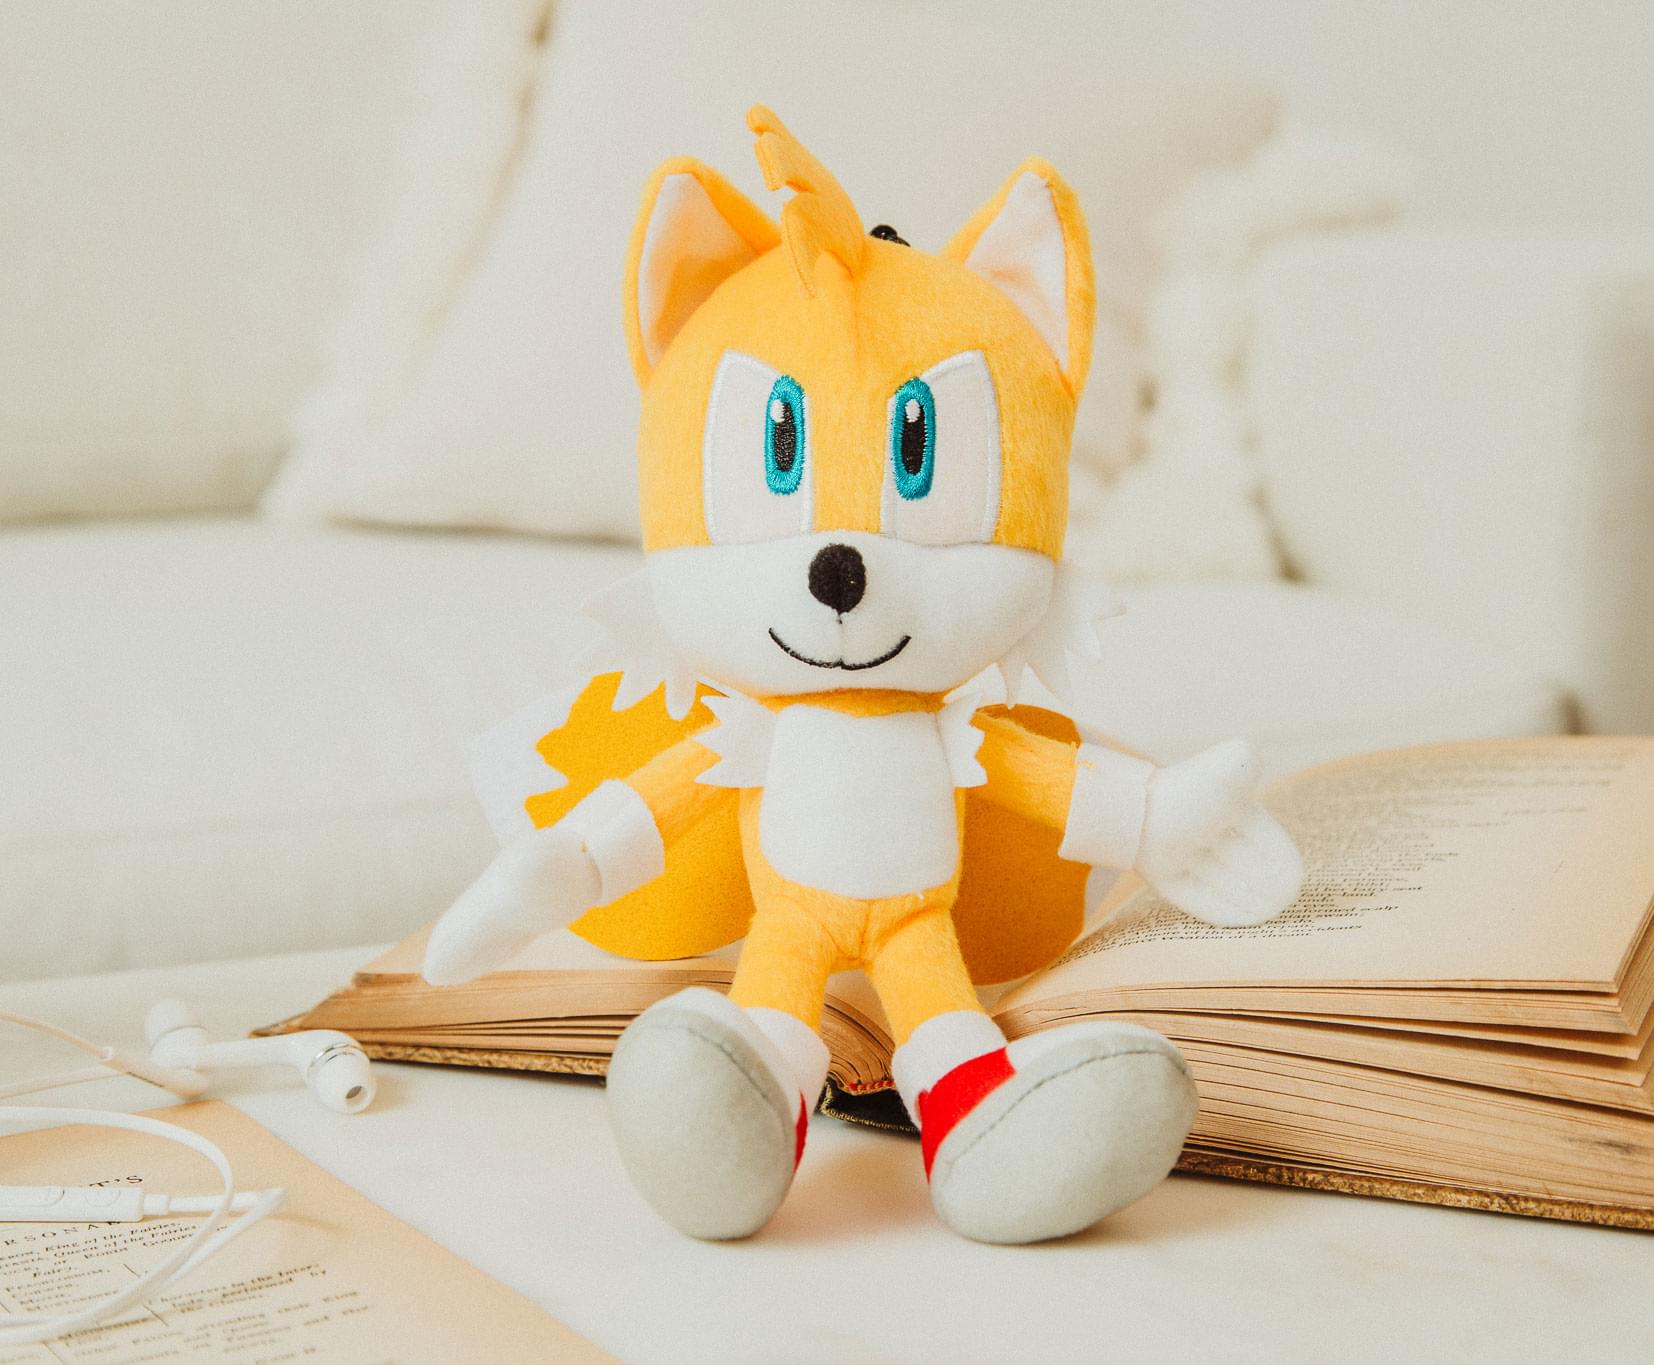 BRAND NEW! Large 12” Tails Sonic The Hedgehog Yellow Plush Stuffed